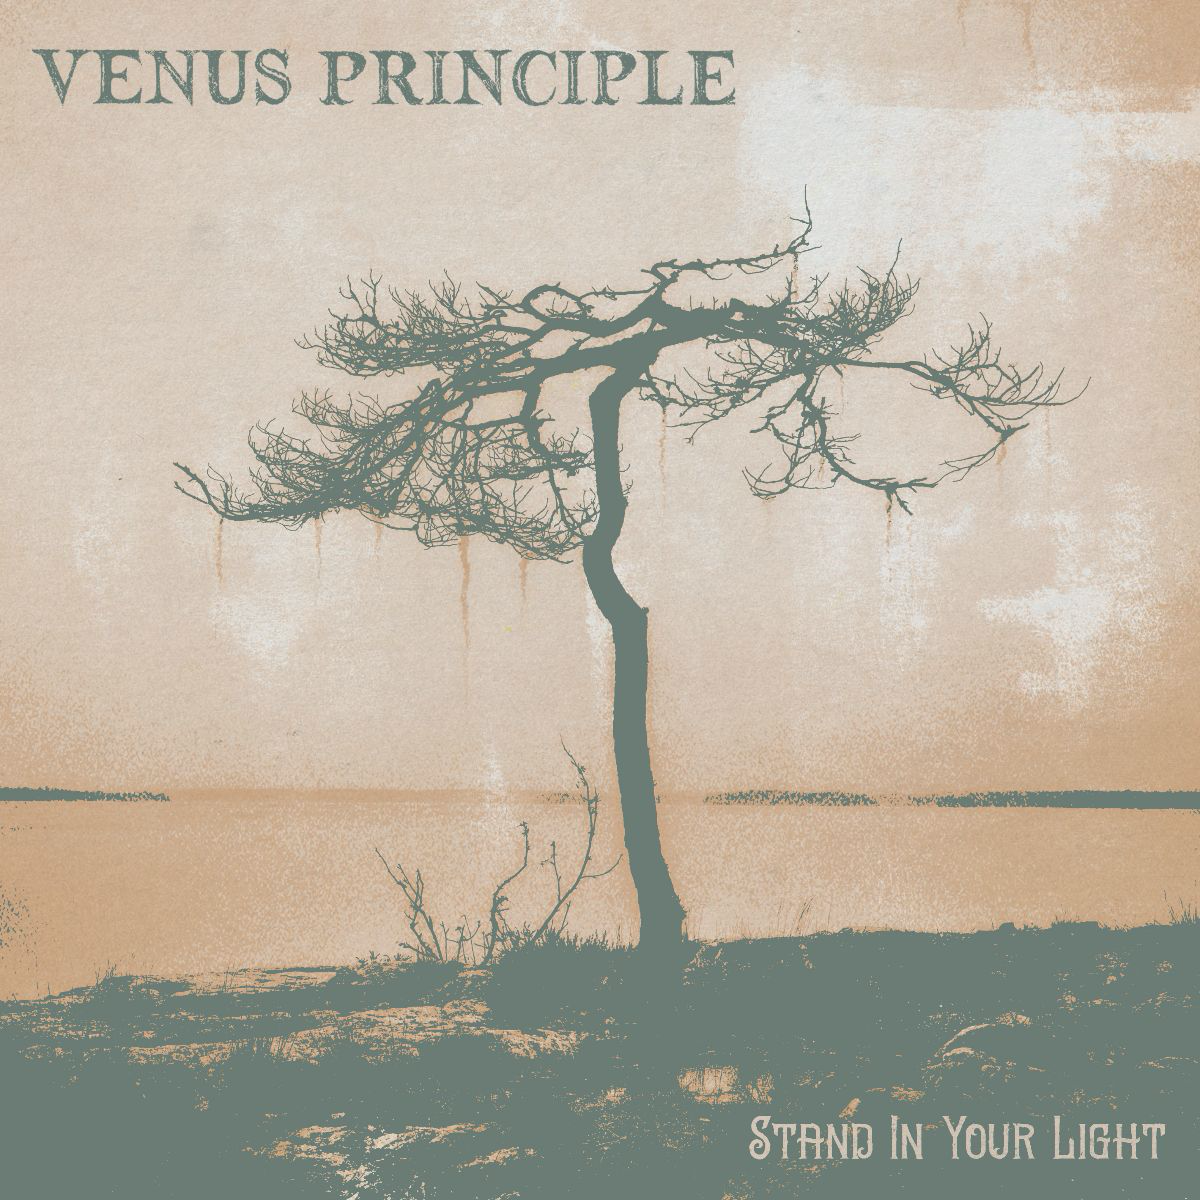 venus-principle-stand-in-your-light-album-cover.png